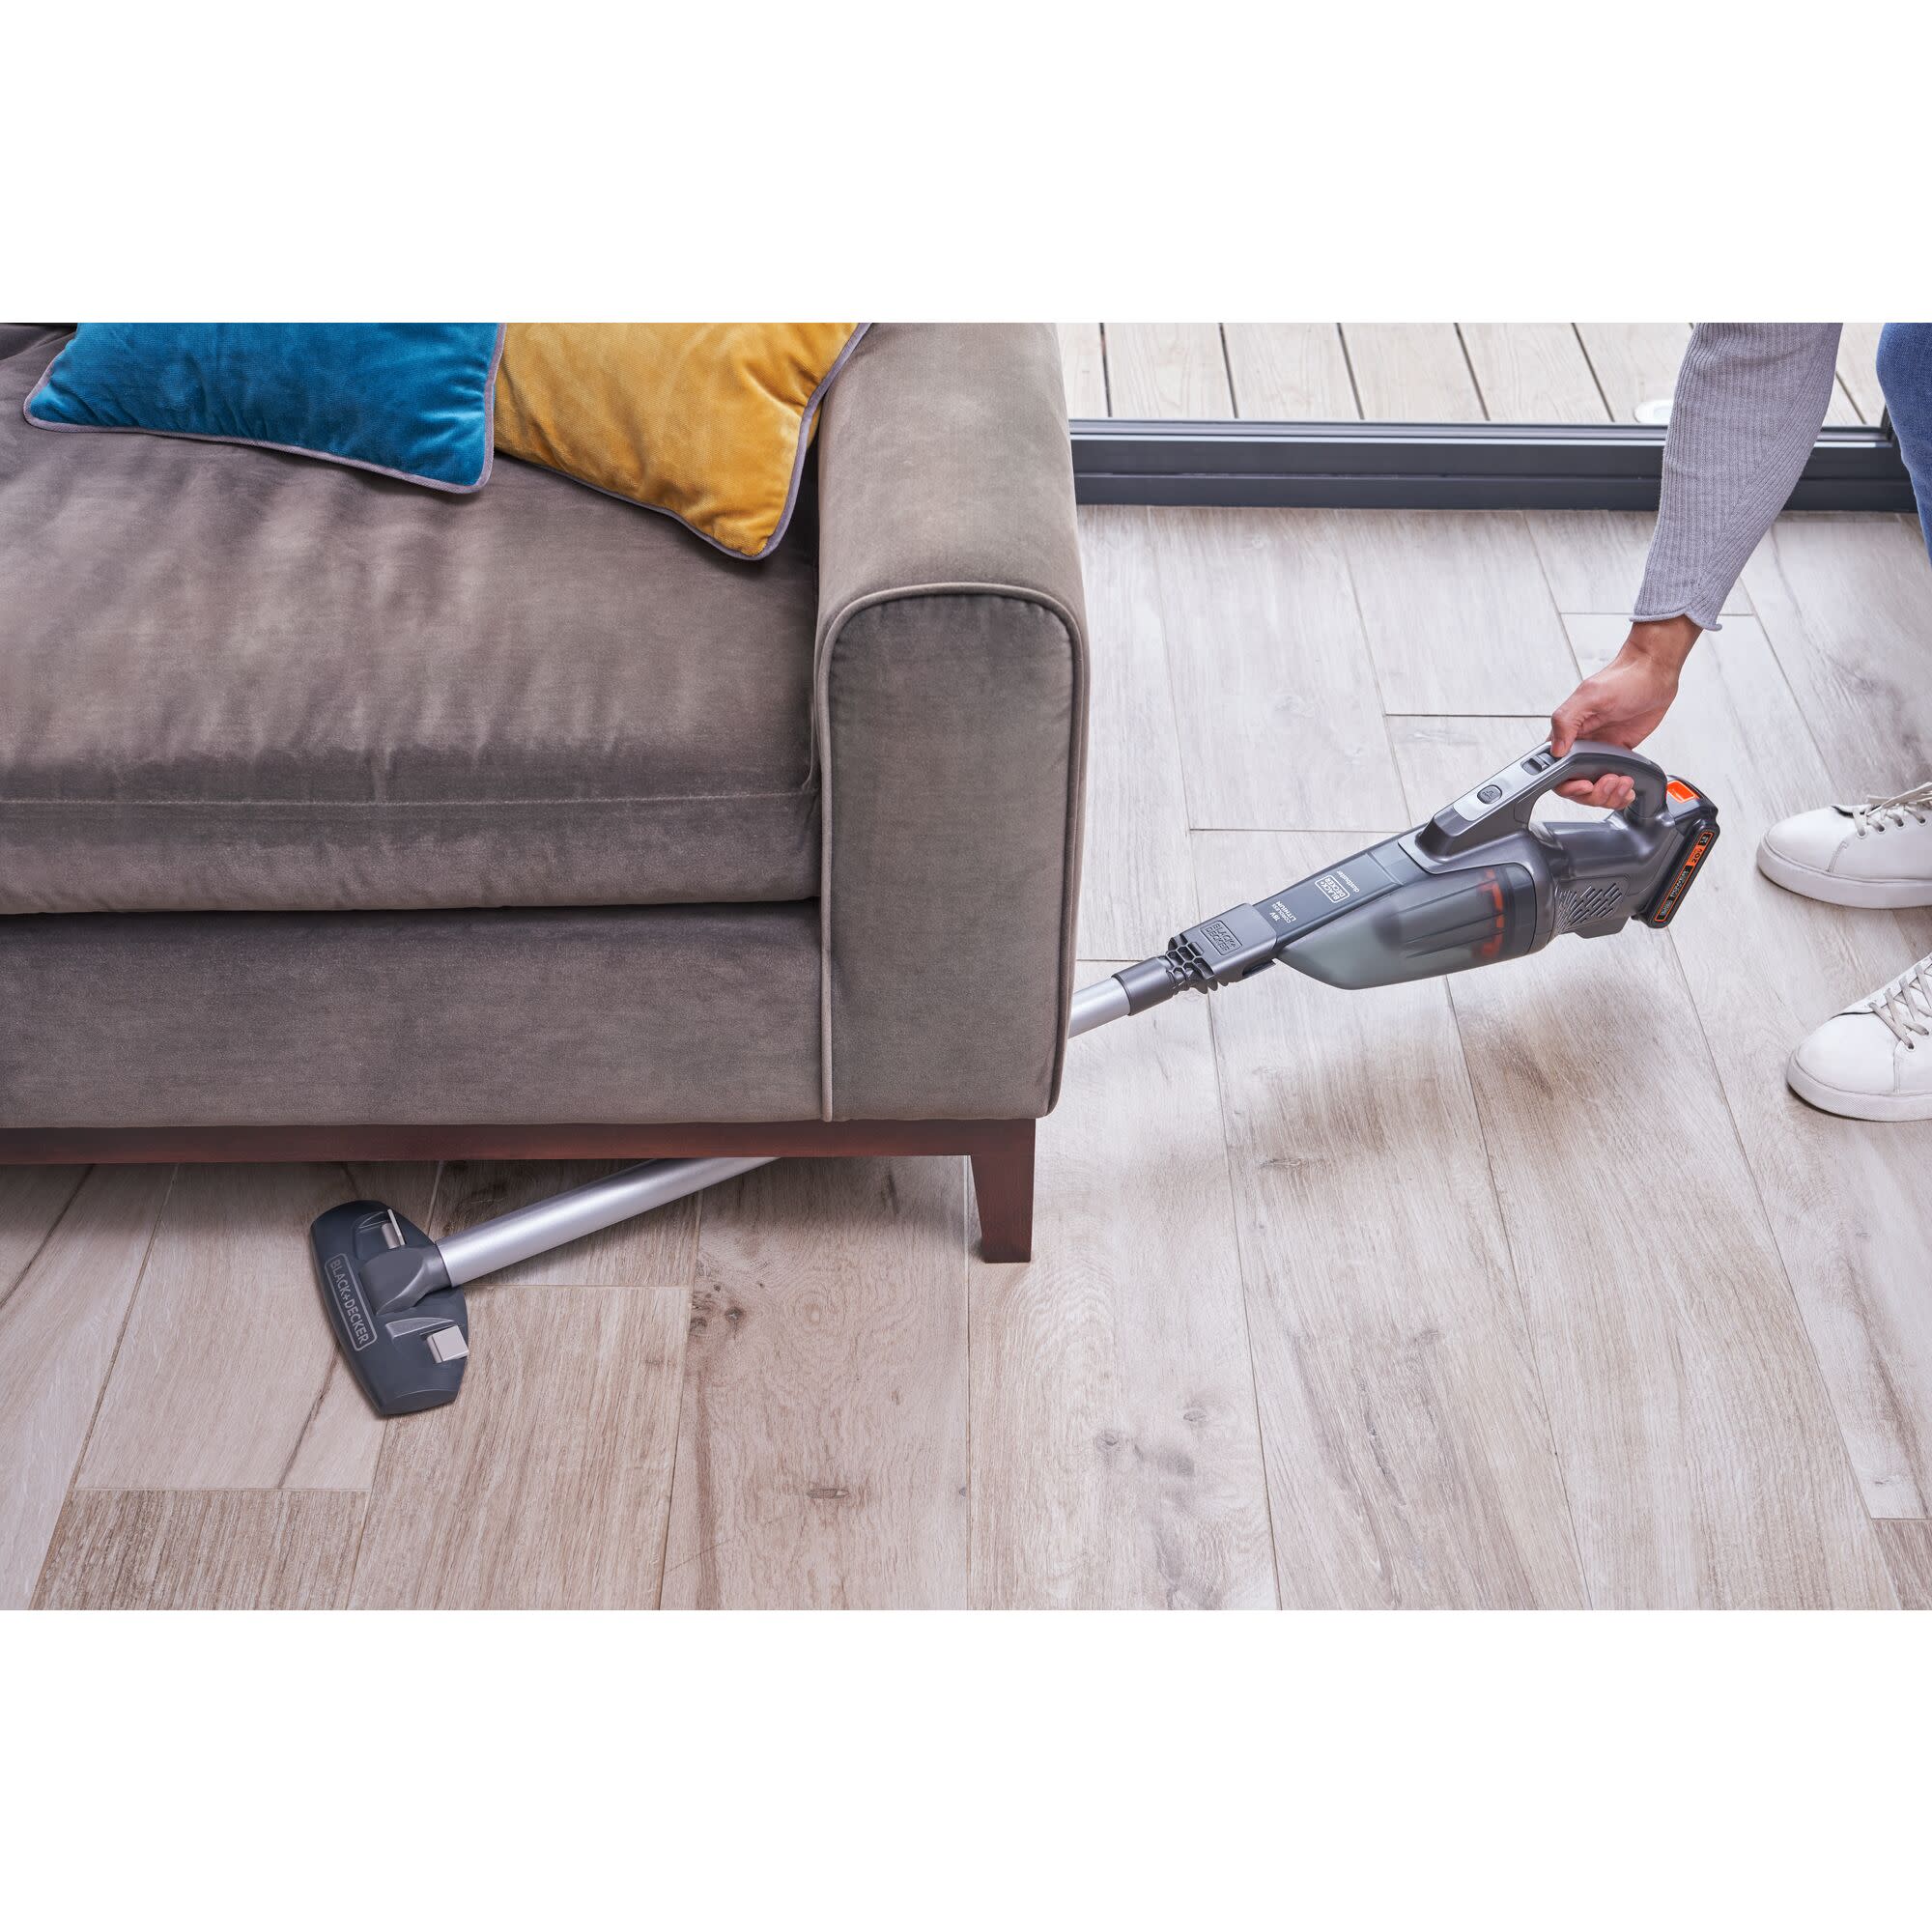 Dustbuster 20V MAX* PowerConnect Cordless Handheld Vacuum (Tool Only)